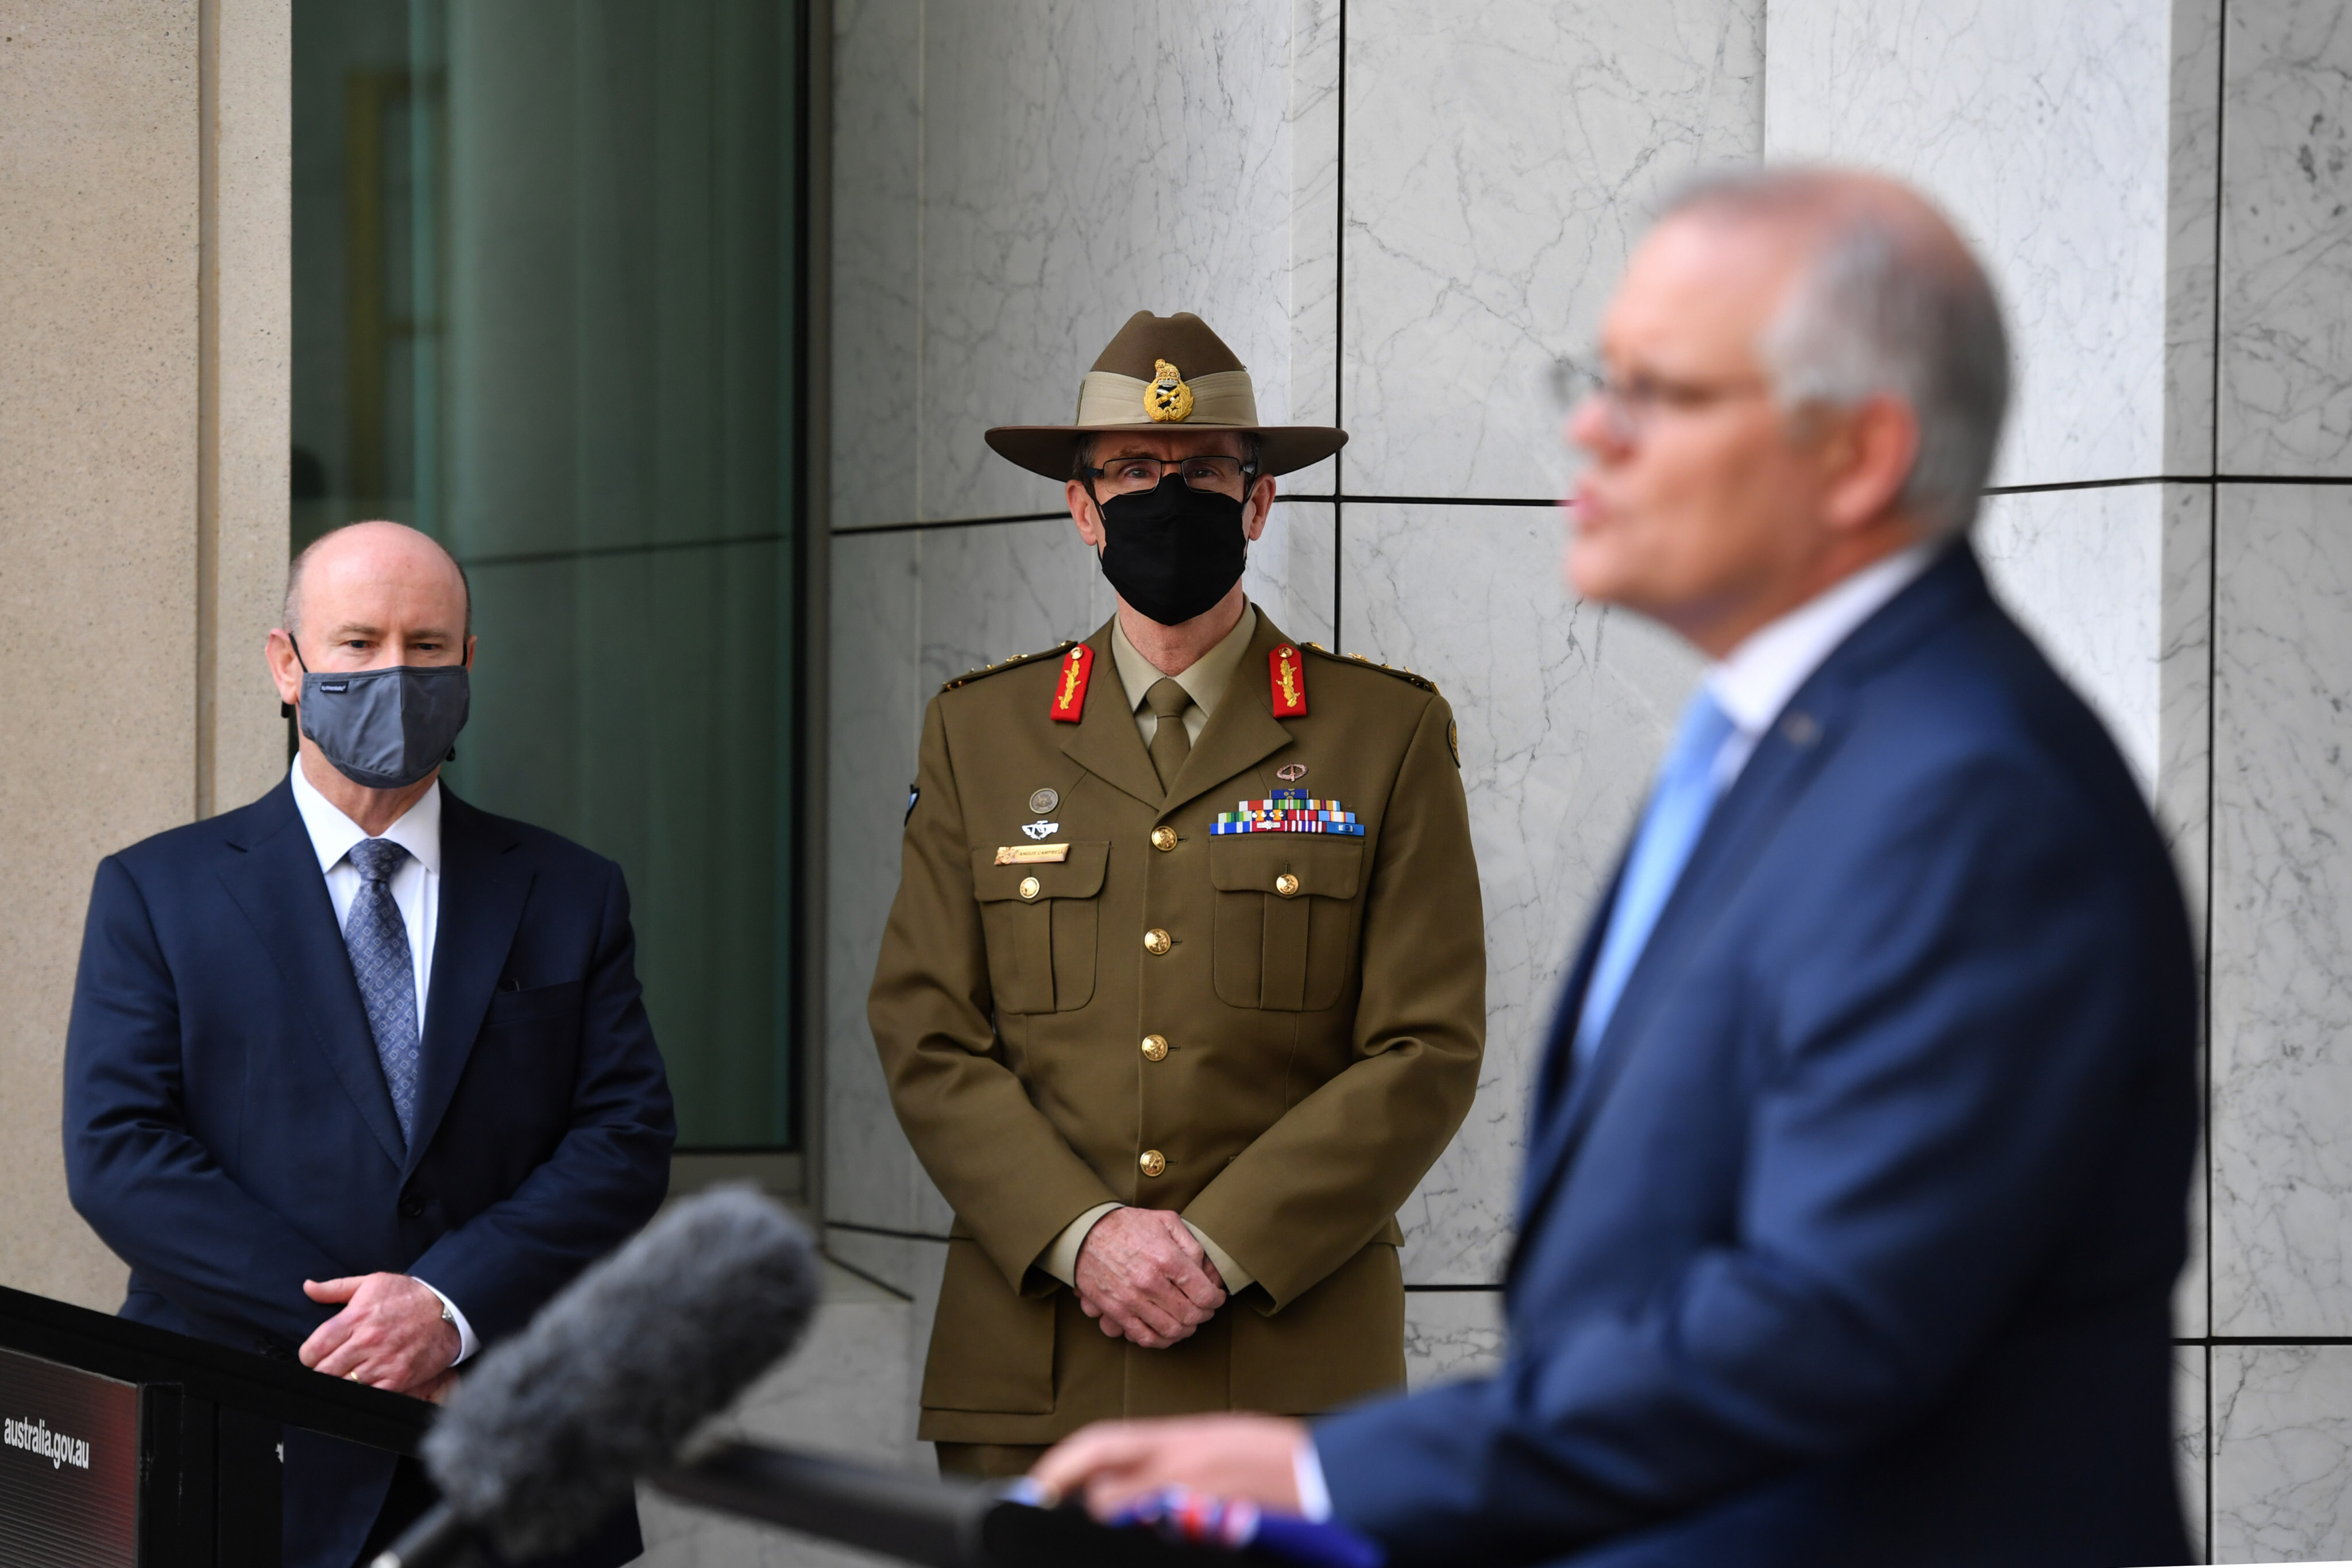 (From the left) Australian Defence Secretary Greg Moriarty, Chief of the Australian Defence Force General Angus Campbell and Prime Minister Scott Morrison at a press conference at Parliament House in Canberra, on September 16. Photo: AAP